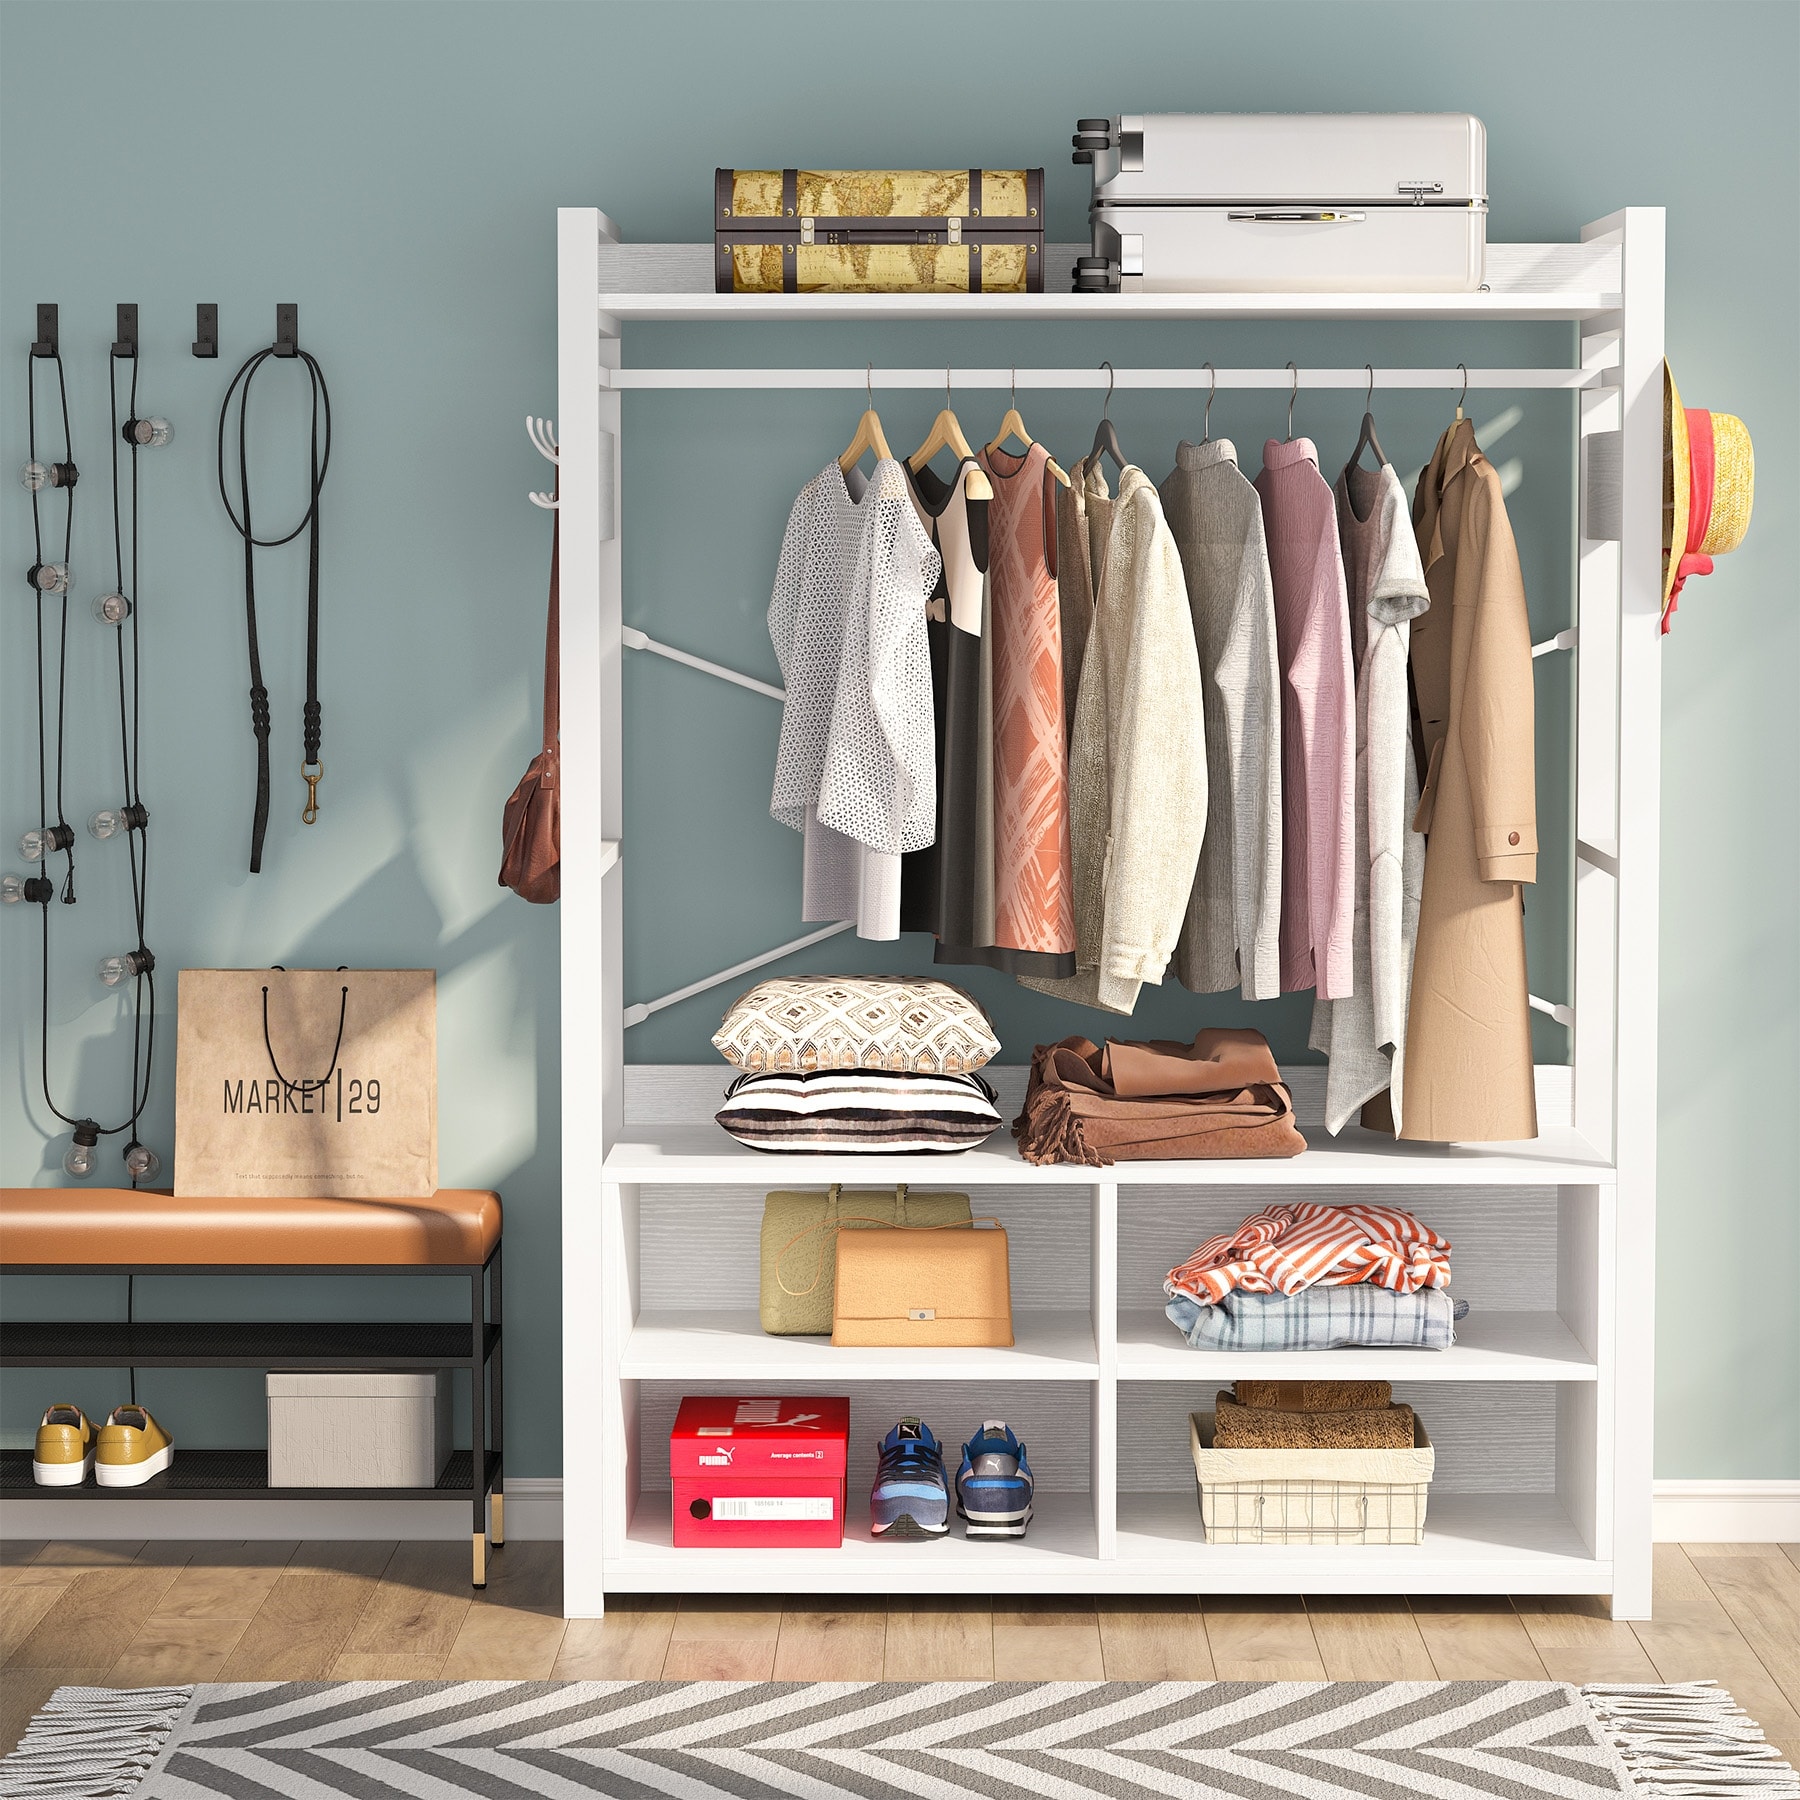 https://ak1.ostkcdn.com/images/products/is/images/direct/9d4600dc12b03de72b4051ba8c053ebc632b6d7b/Metal-Wood-Free-standing-Closet-Clothing-Rack-Closet-Organizer-System-with-Shelves-Clothes-Garment-Rack-Shelving-for-Bedroom.jpg